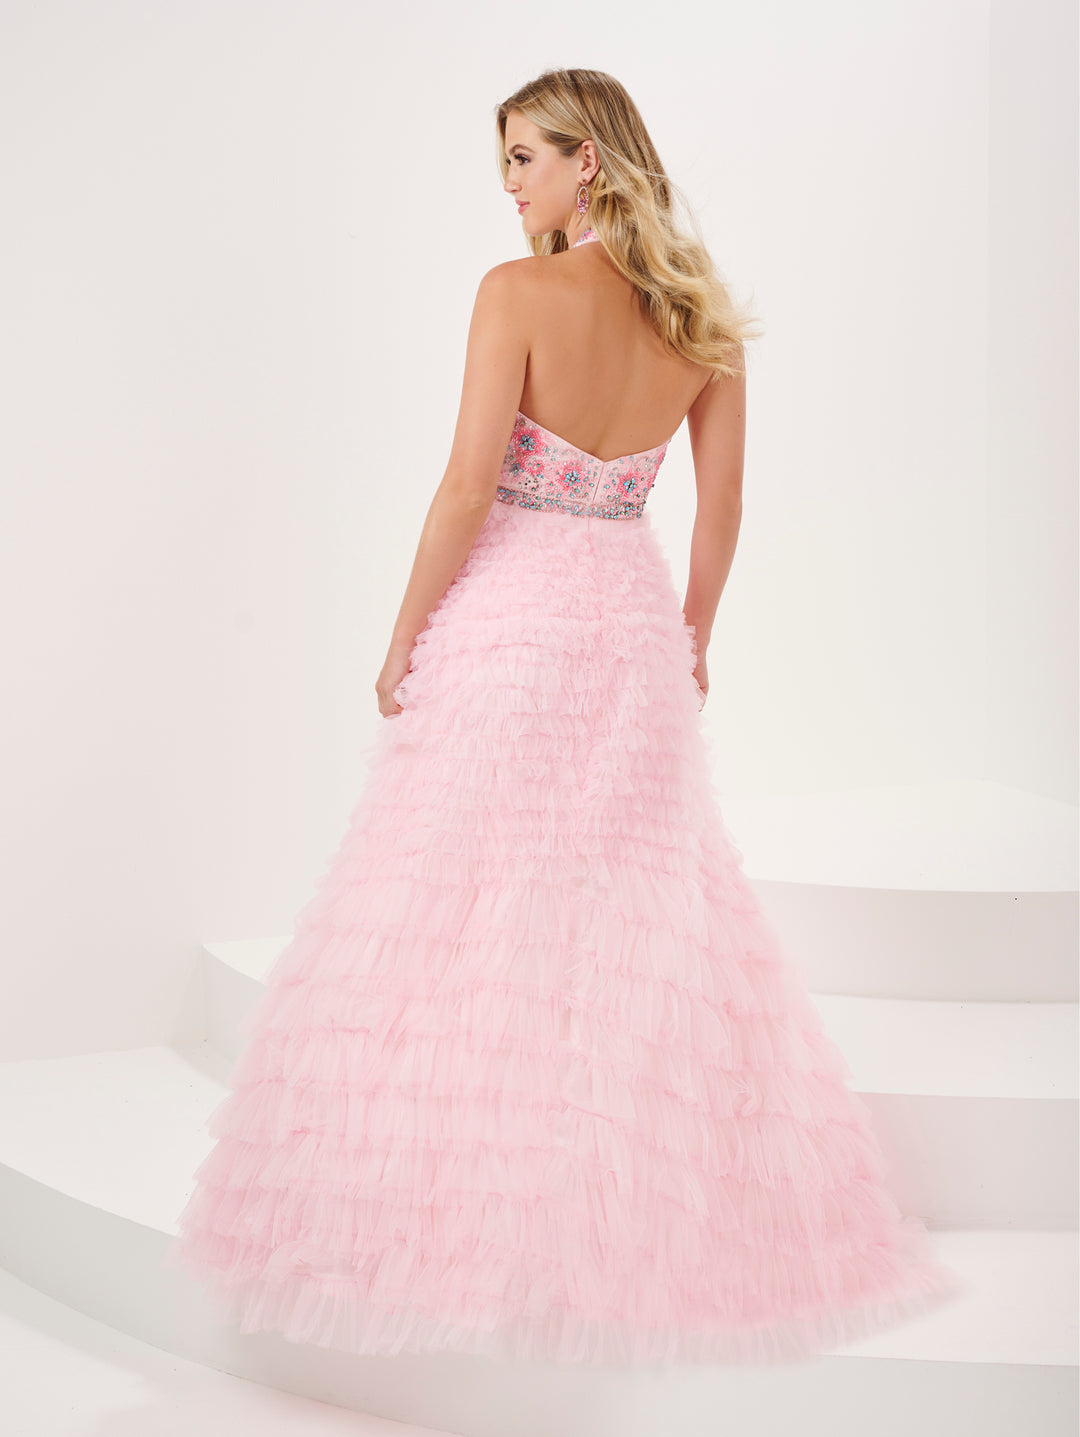 Ruffled Floral Beaded Halter A-line Gown by Panoply 14190